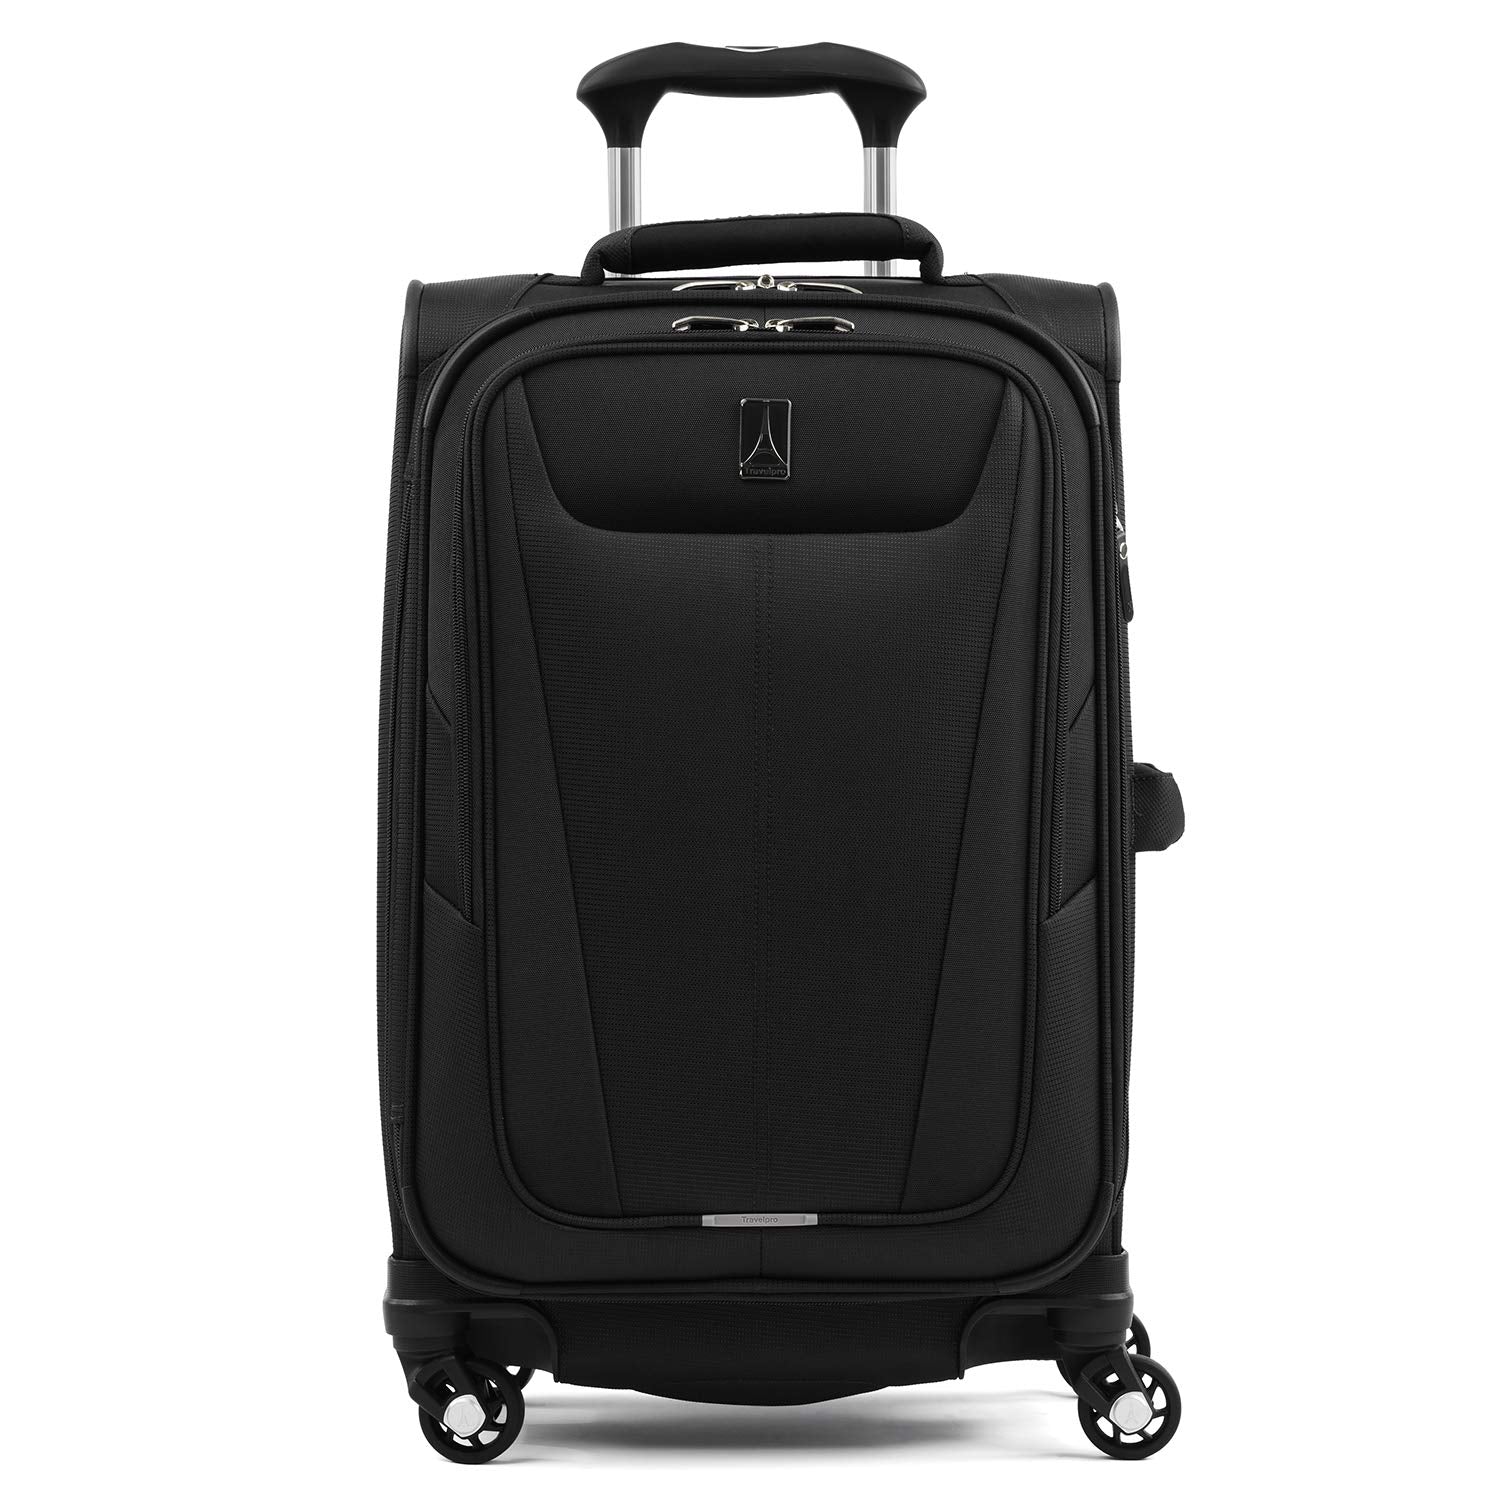 LIGHT FLIGHT Carry On Luggage Airline Approved, Softside Suitcase with  Spinner Wheels 20 Inch Small Lightweight Carry-on Luggage with Front  Pockets